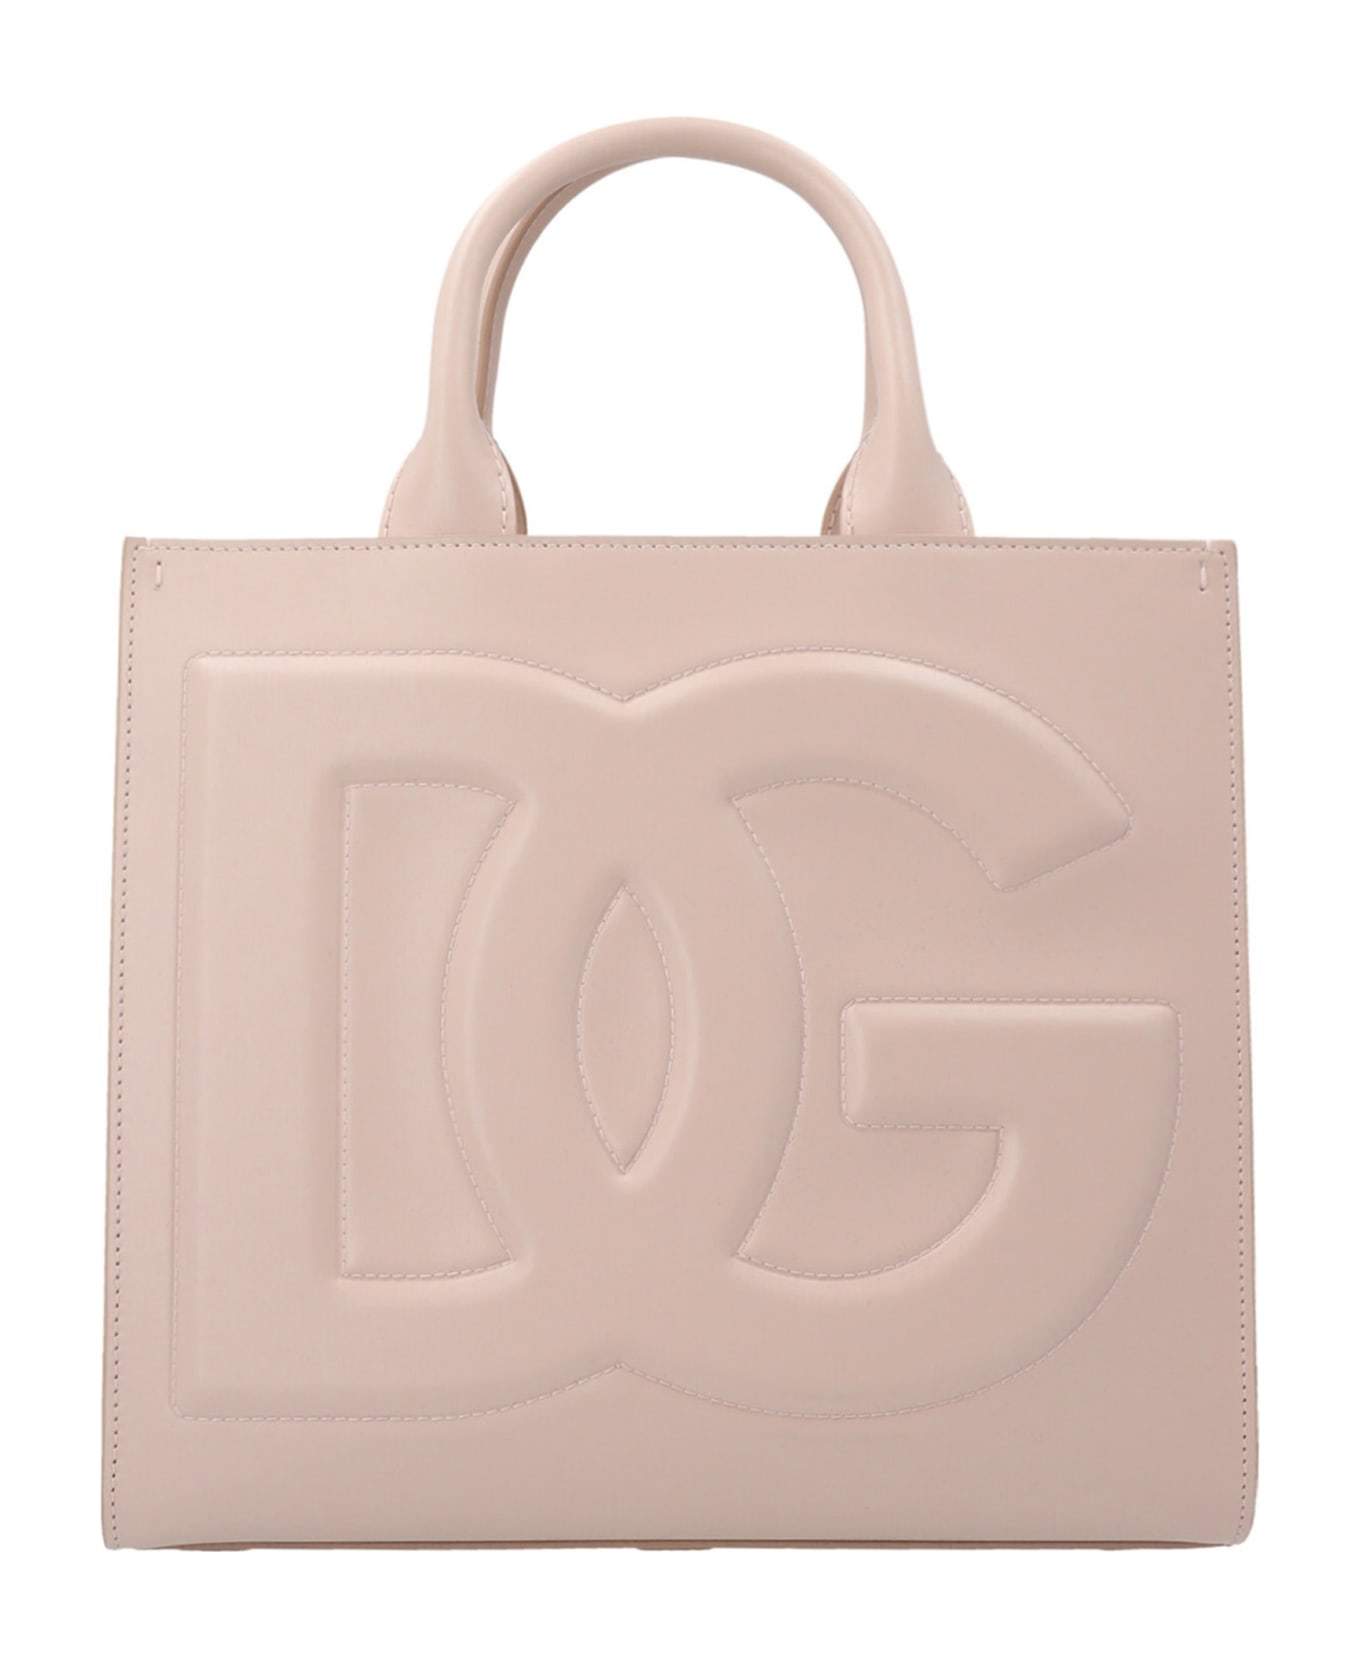 Dolce & Gabbana Dg Daily Leather Tote Bag - PINK